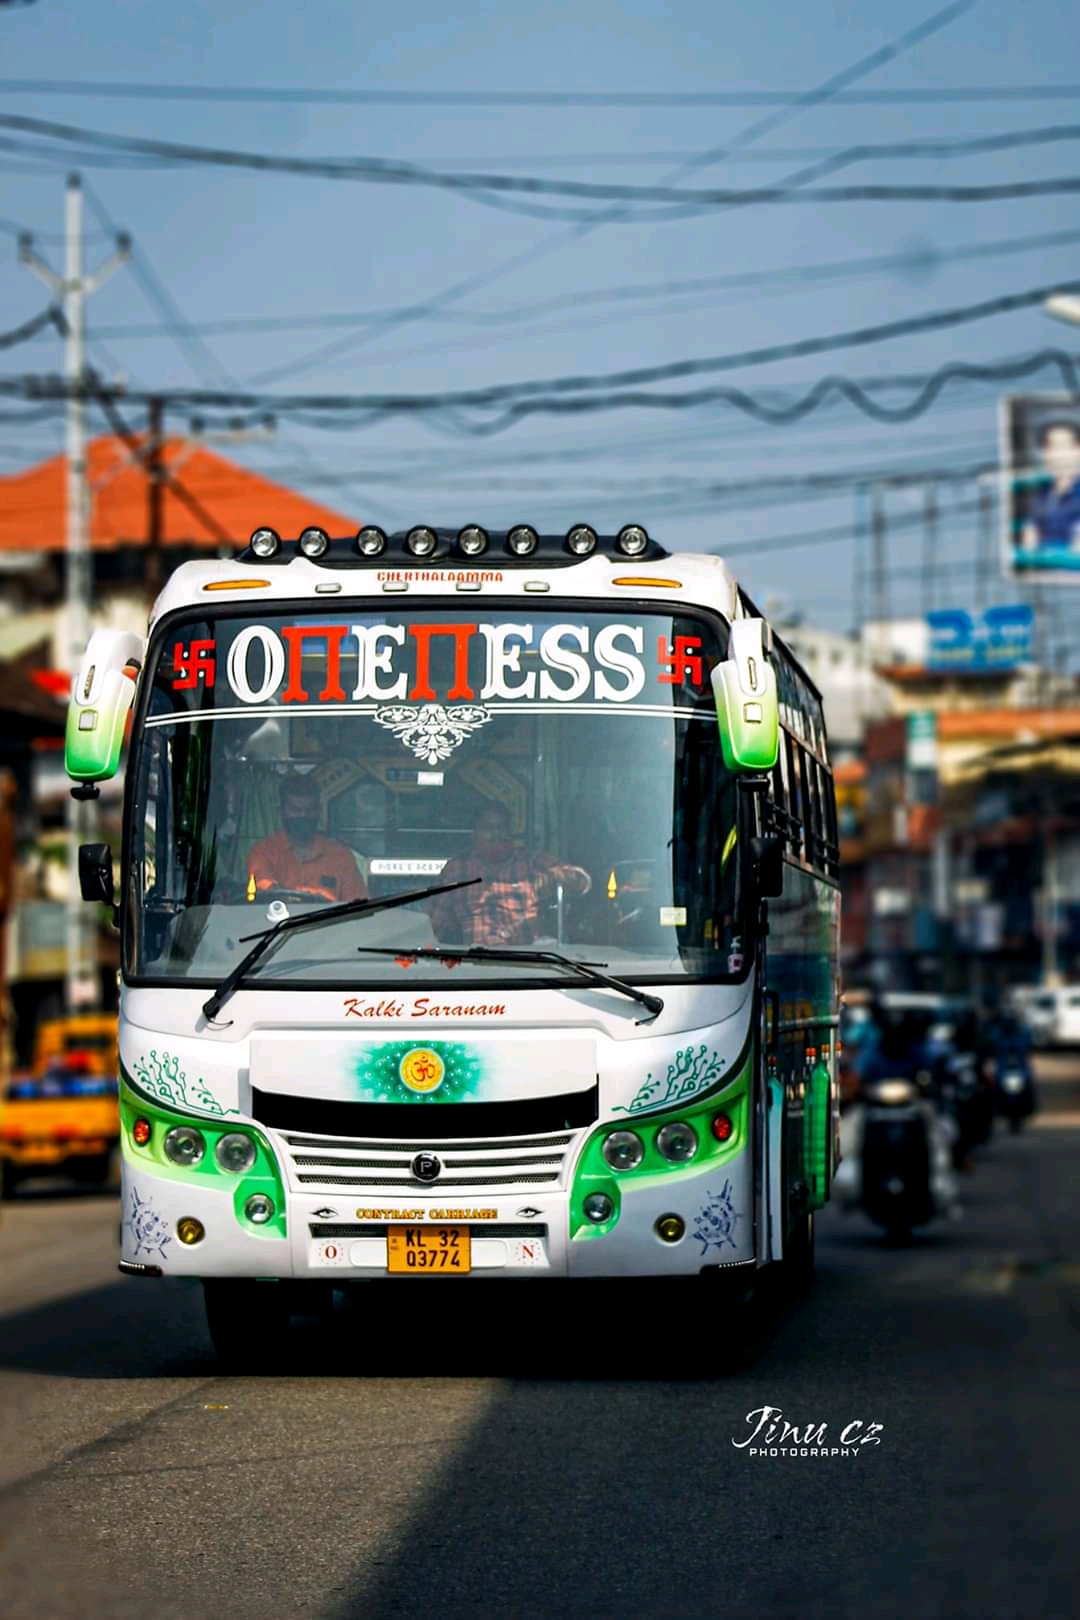 ❤Oneness new 4 bus coming coming soon from prakash body building ❤ - YouTube